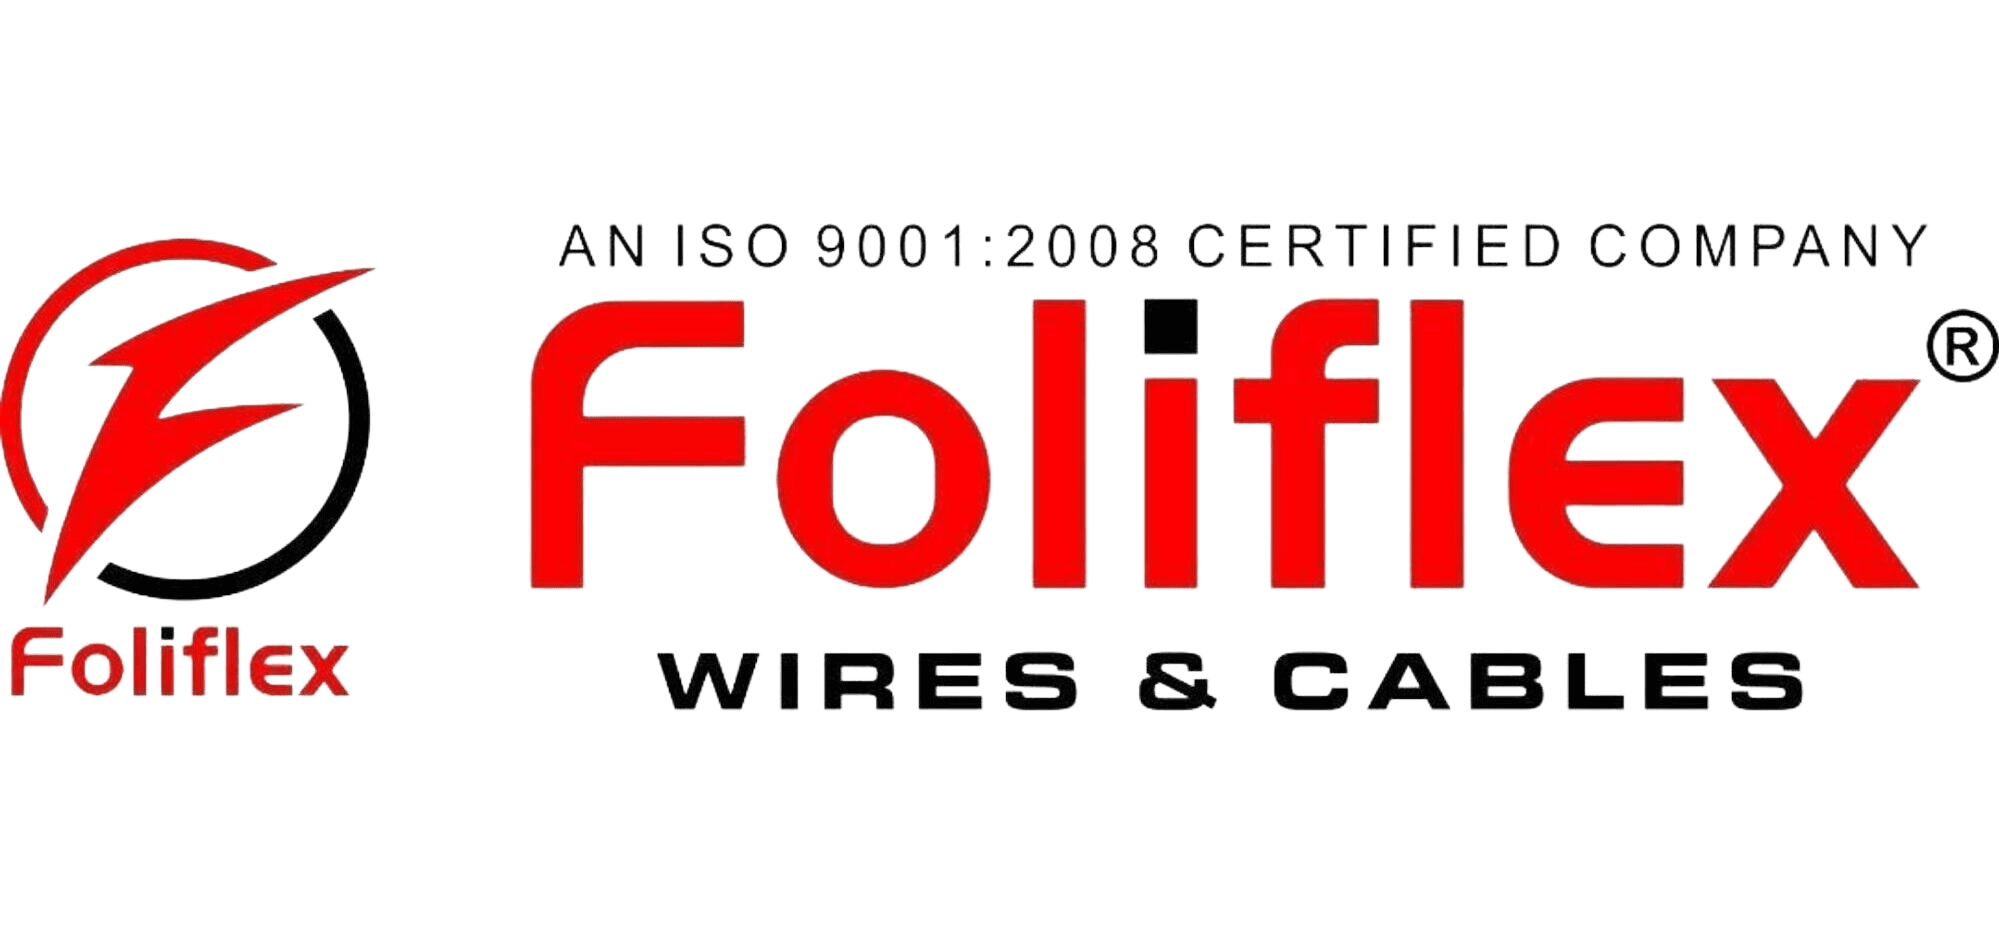 Finolex Cables - The perfect LED with multiple... | Facebook